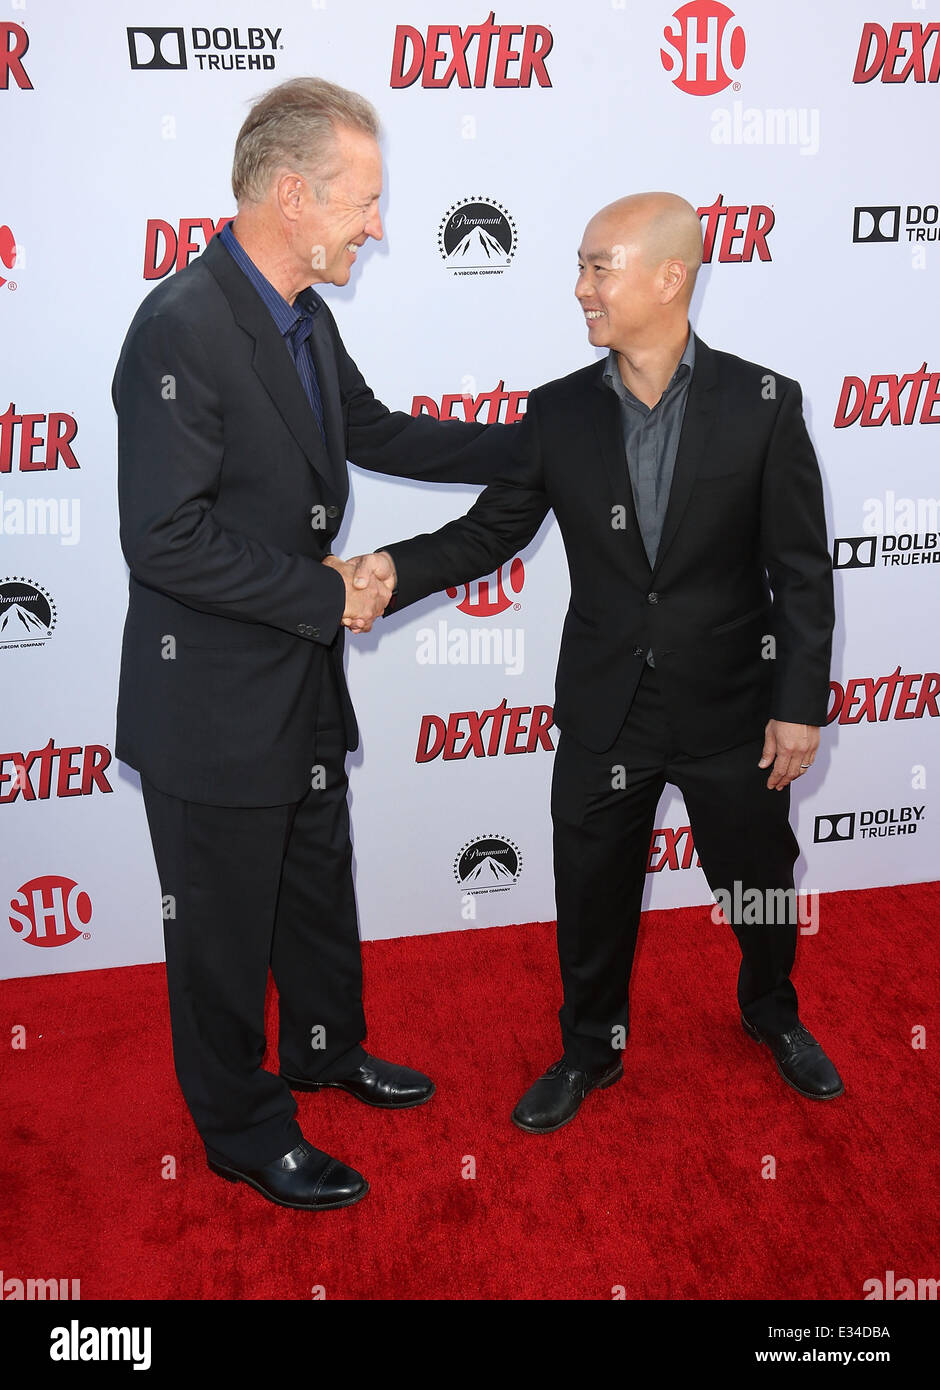 Showtimes' celebration of eight groundbreaking seasons of 'Dexter' at Milk Studios  Featuring: Geoff Pierson,C.S. Lee Where: Los Angeles, CA, United States When: 16 Jun 2013 Stock Photo